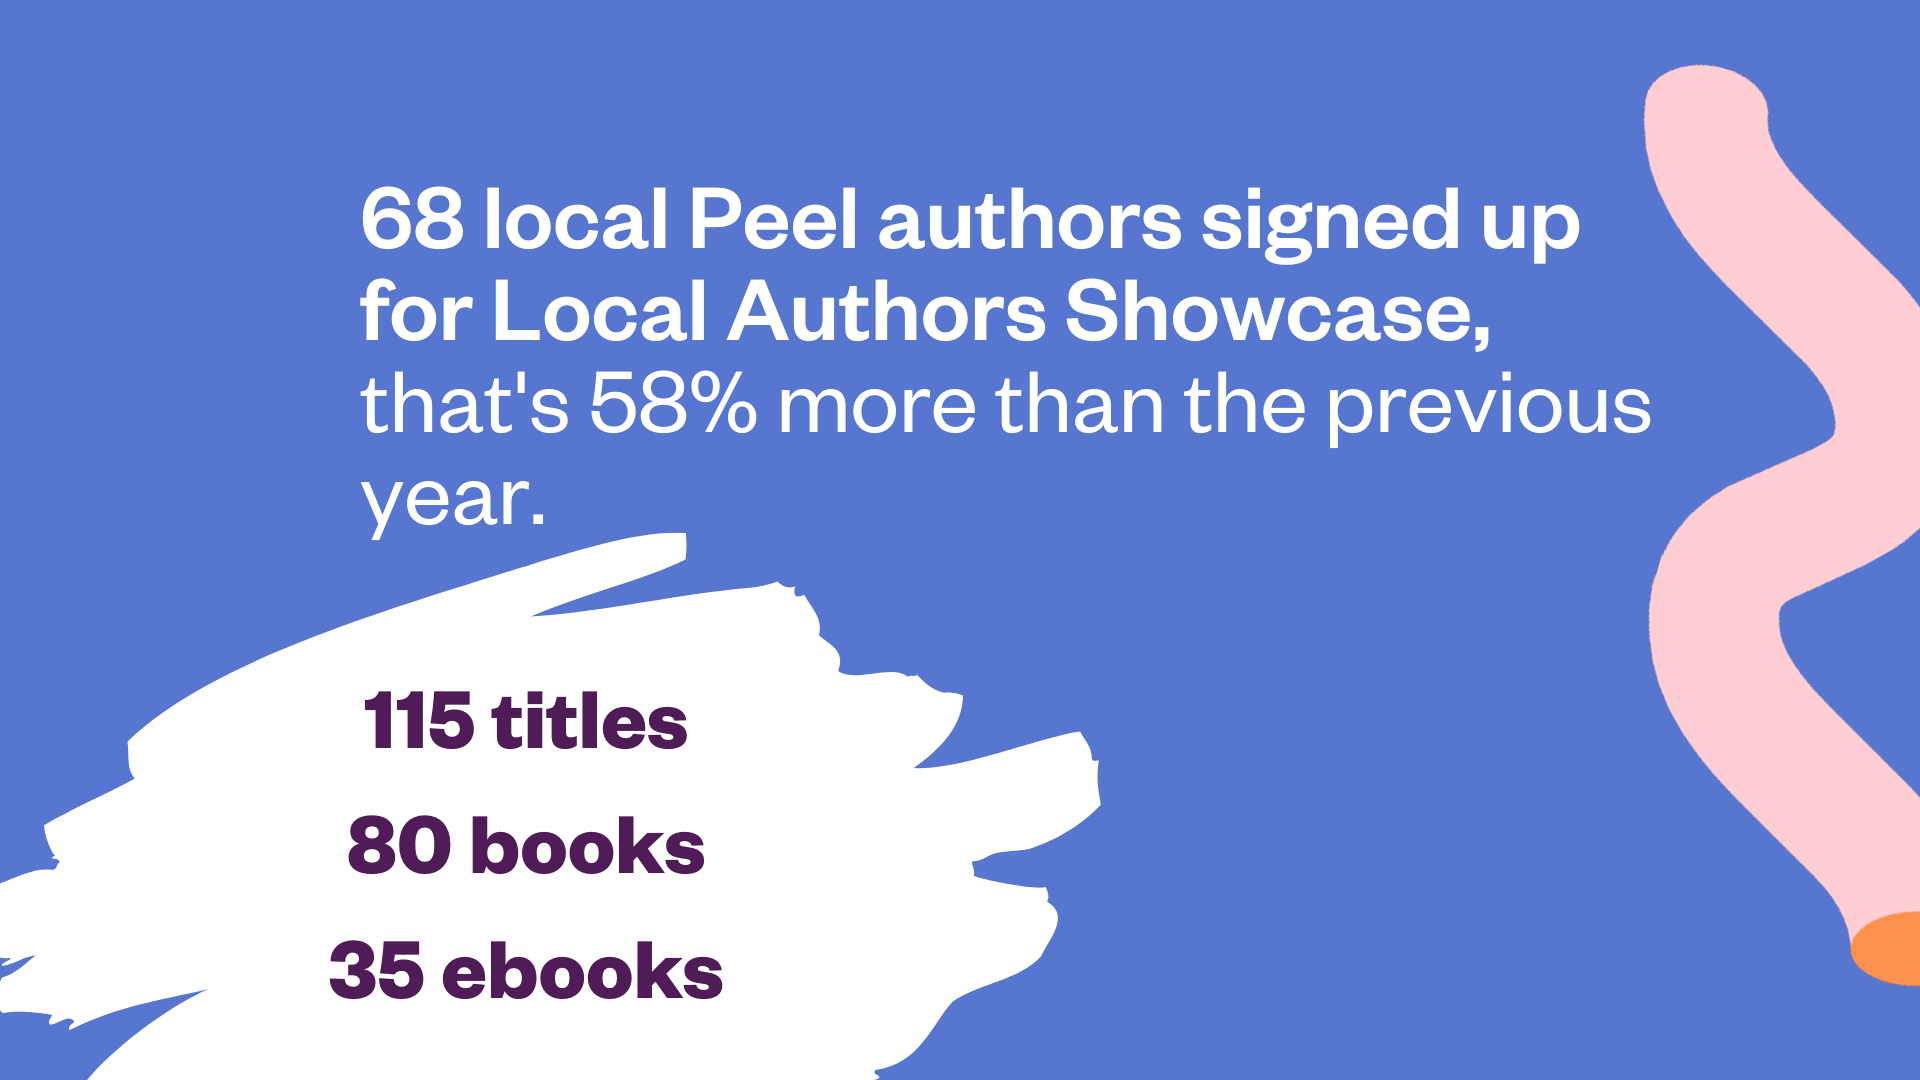 86 Local peel authors signed up for Local Author Showcase, that's 58% more than the previous year. 115 titles, 80 books, and 35 ebooks. 